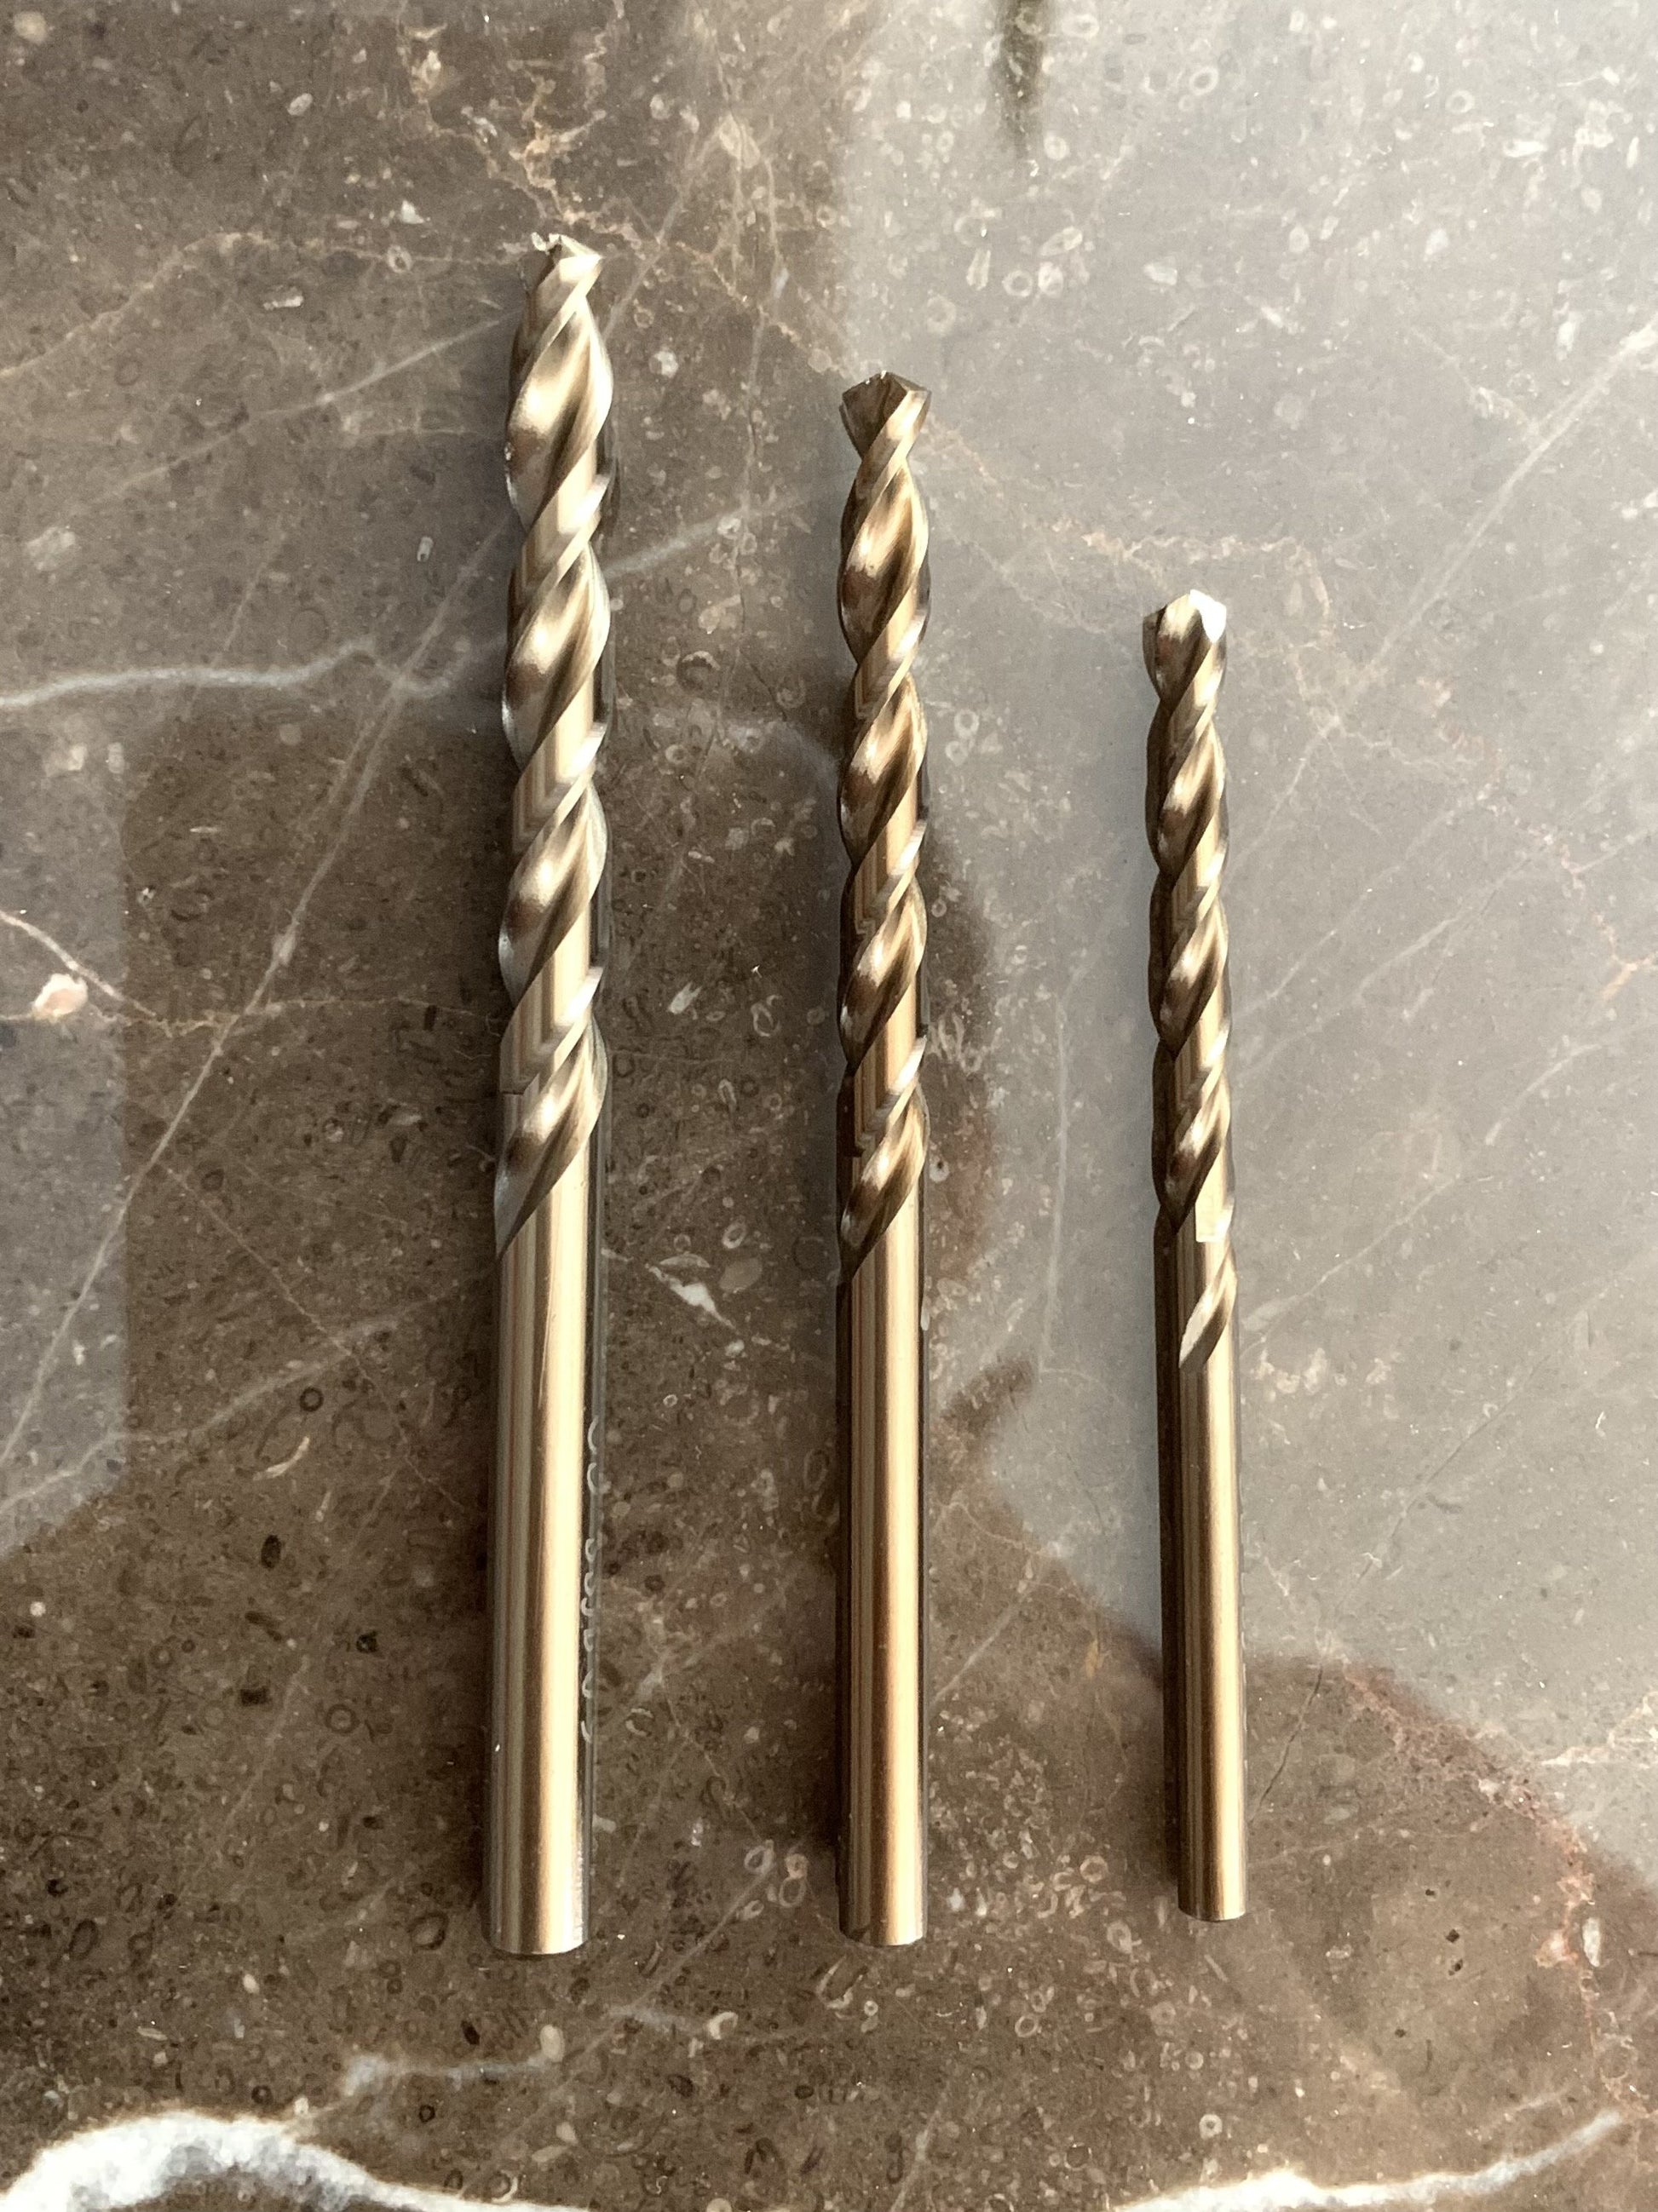 HSS Drill Bit with option of 3.5, 4, 4.5, 5, and 6mm